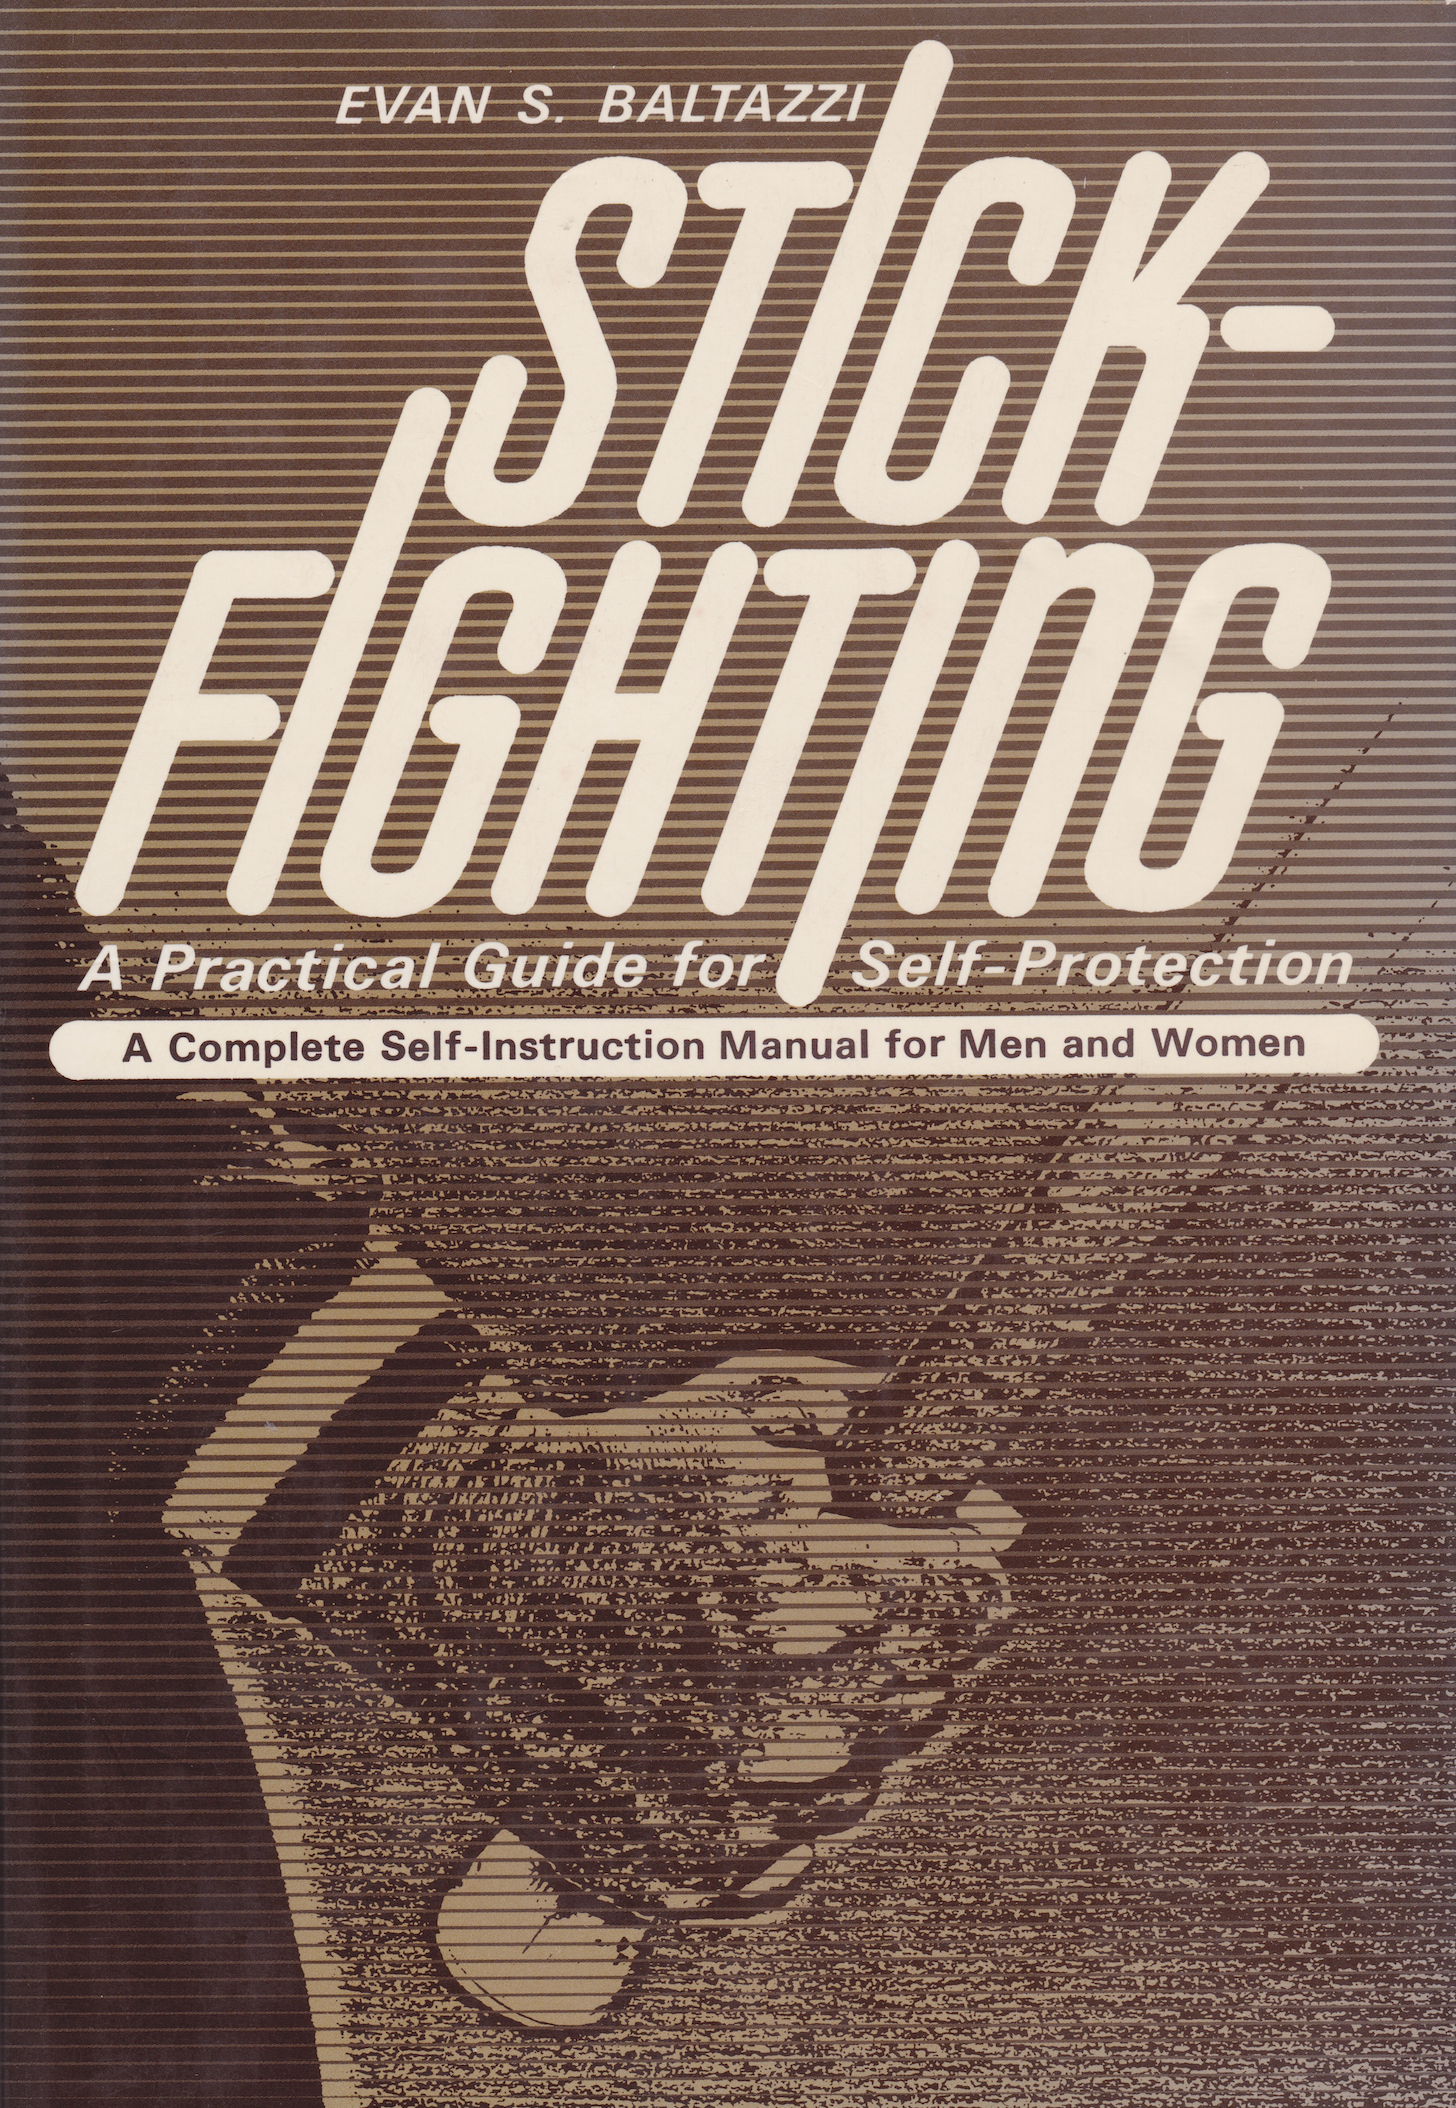 Stick Fighting: A Practical Guide for Self Protection Book by Evan Baltazzi (Hardcover)(Preowned)